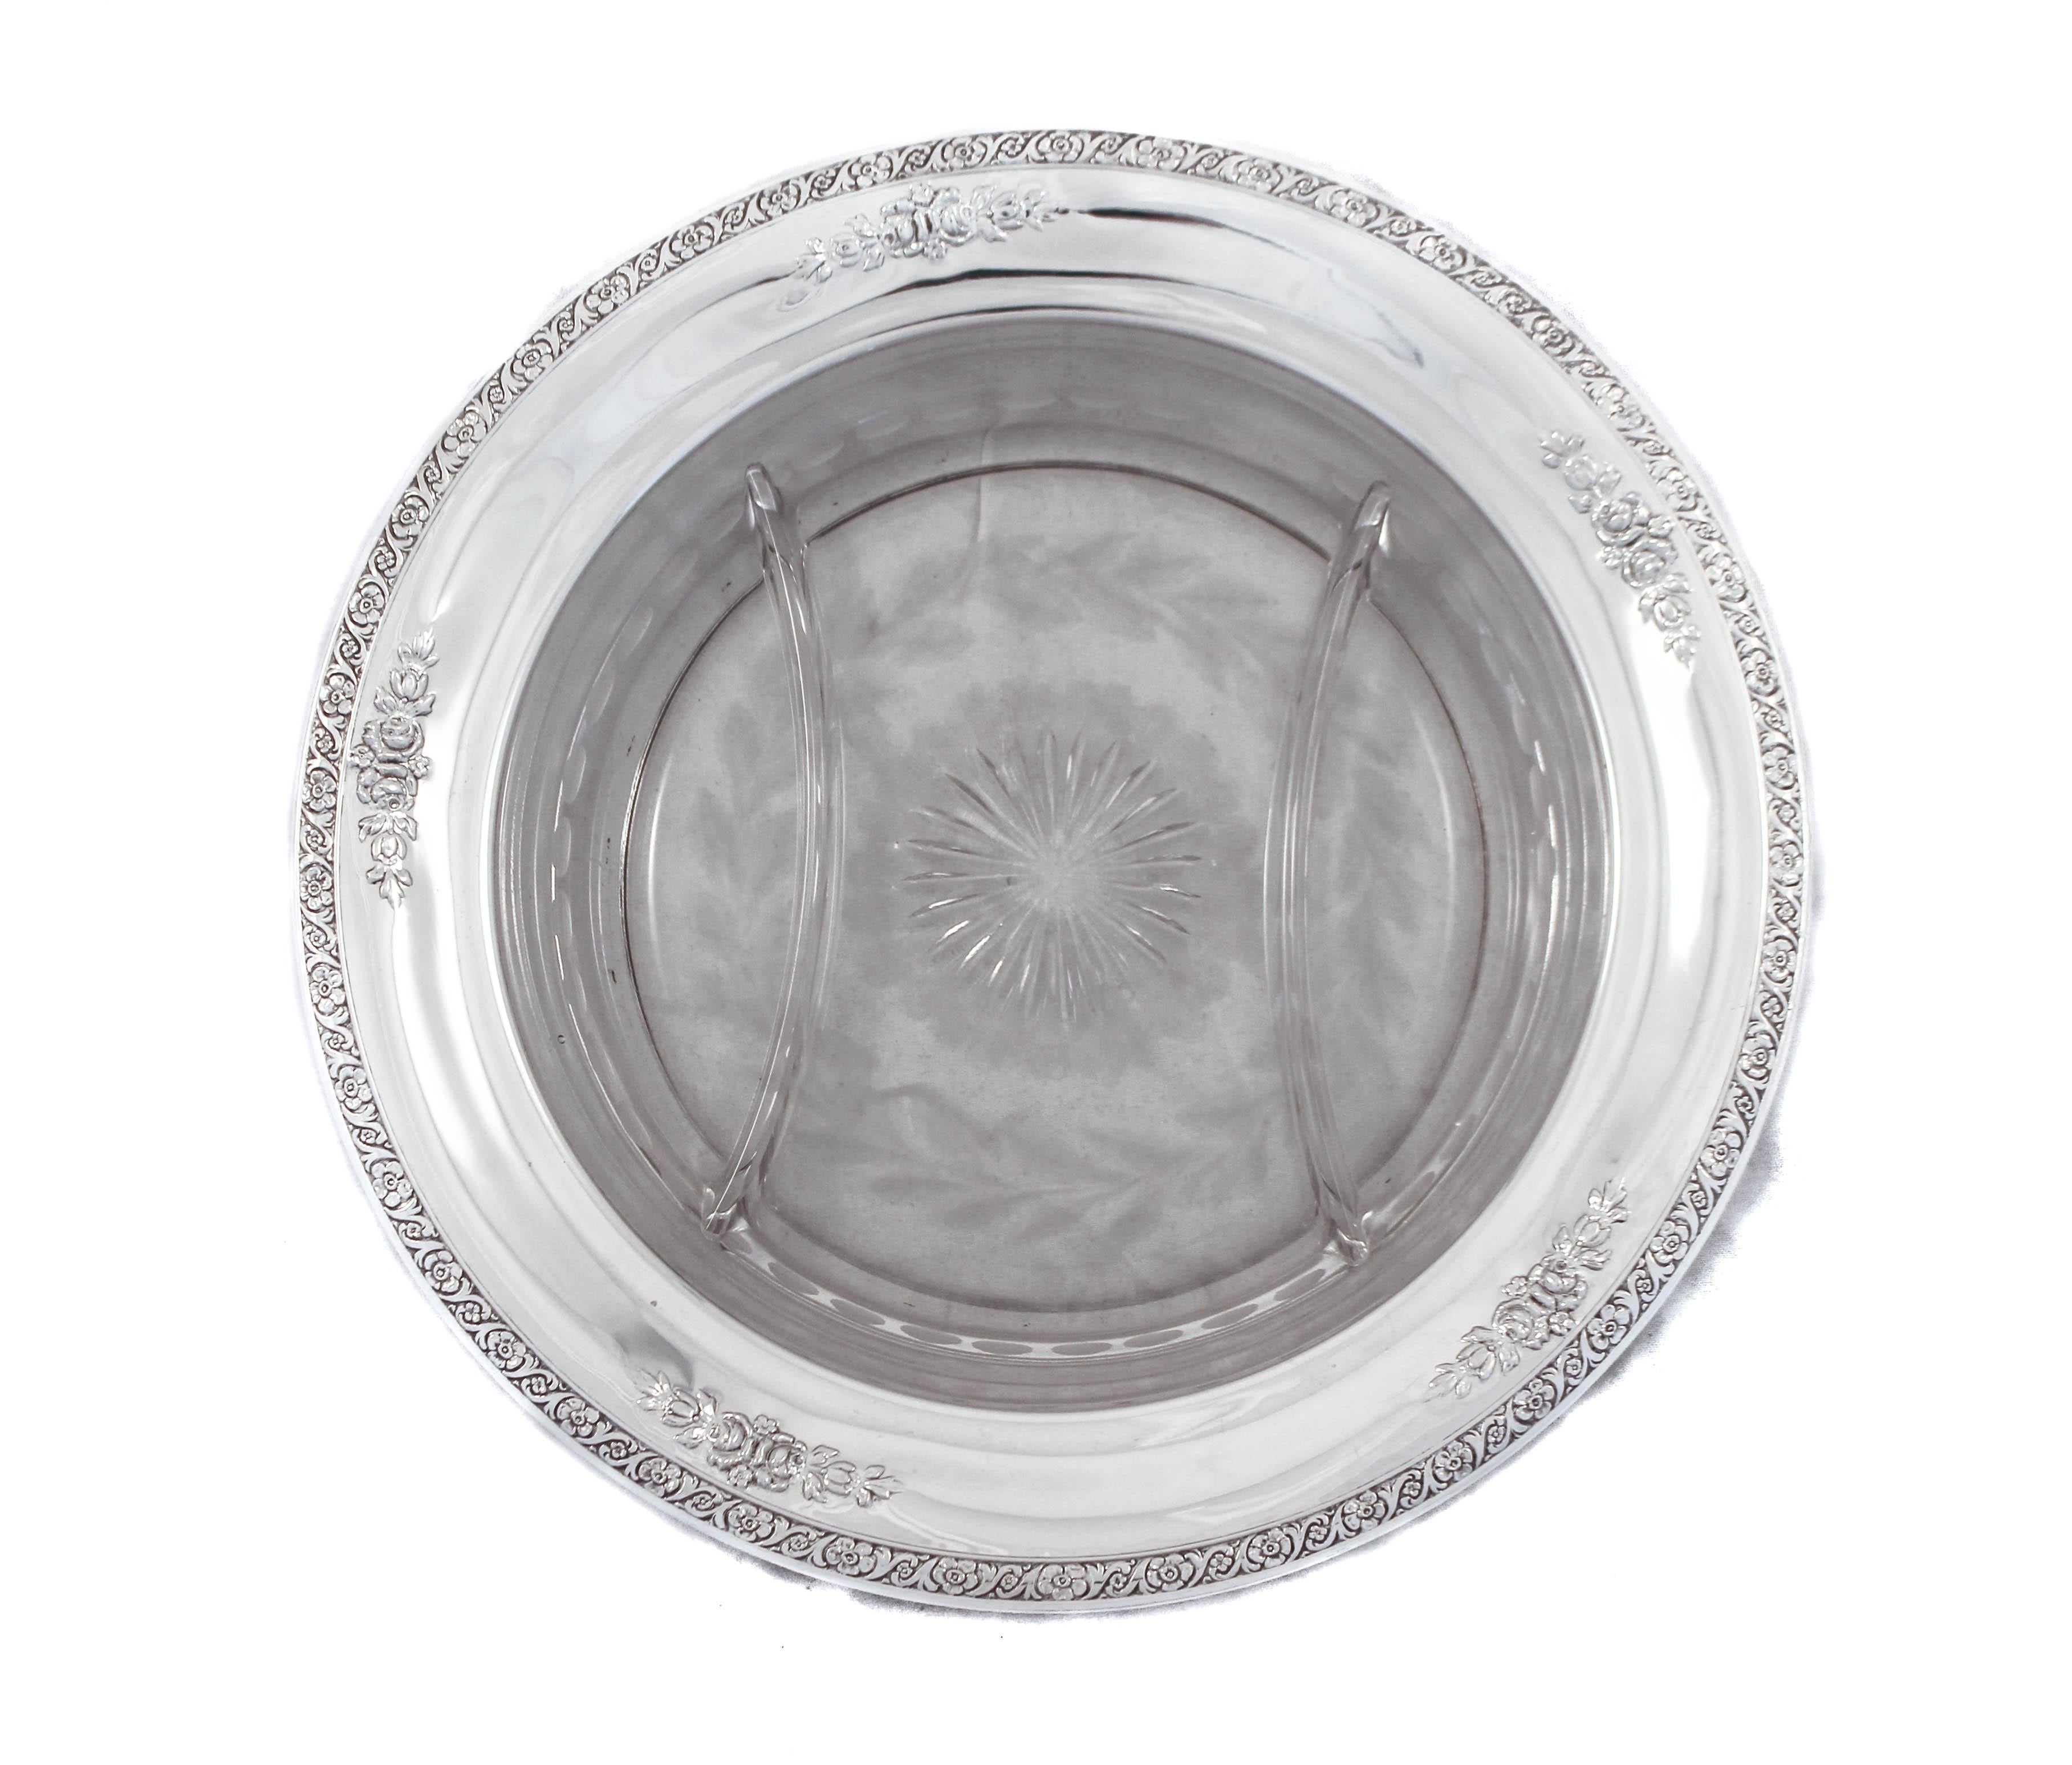 We are delighted to offer you this pair of sterling silver and crystal sectionals by Wm. E. Hunt Silver Company of Providence, Rhode Island. Along the sterling silver rim there is a floral pattern that is highlighted with five sets of flowers. The